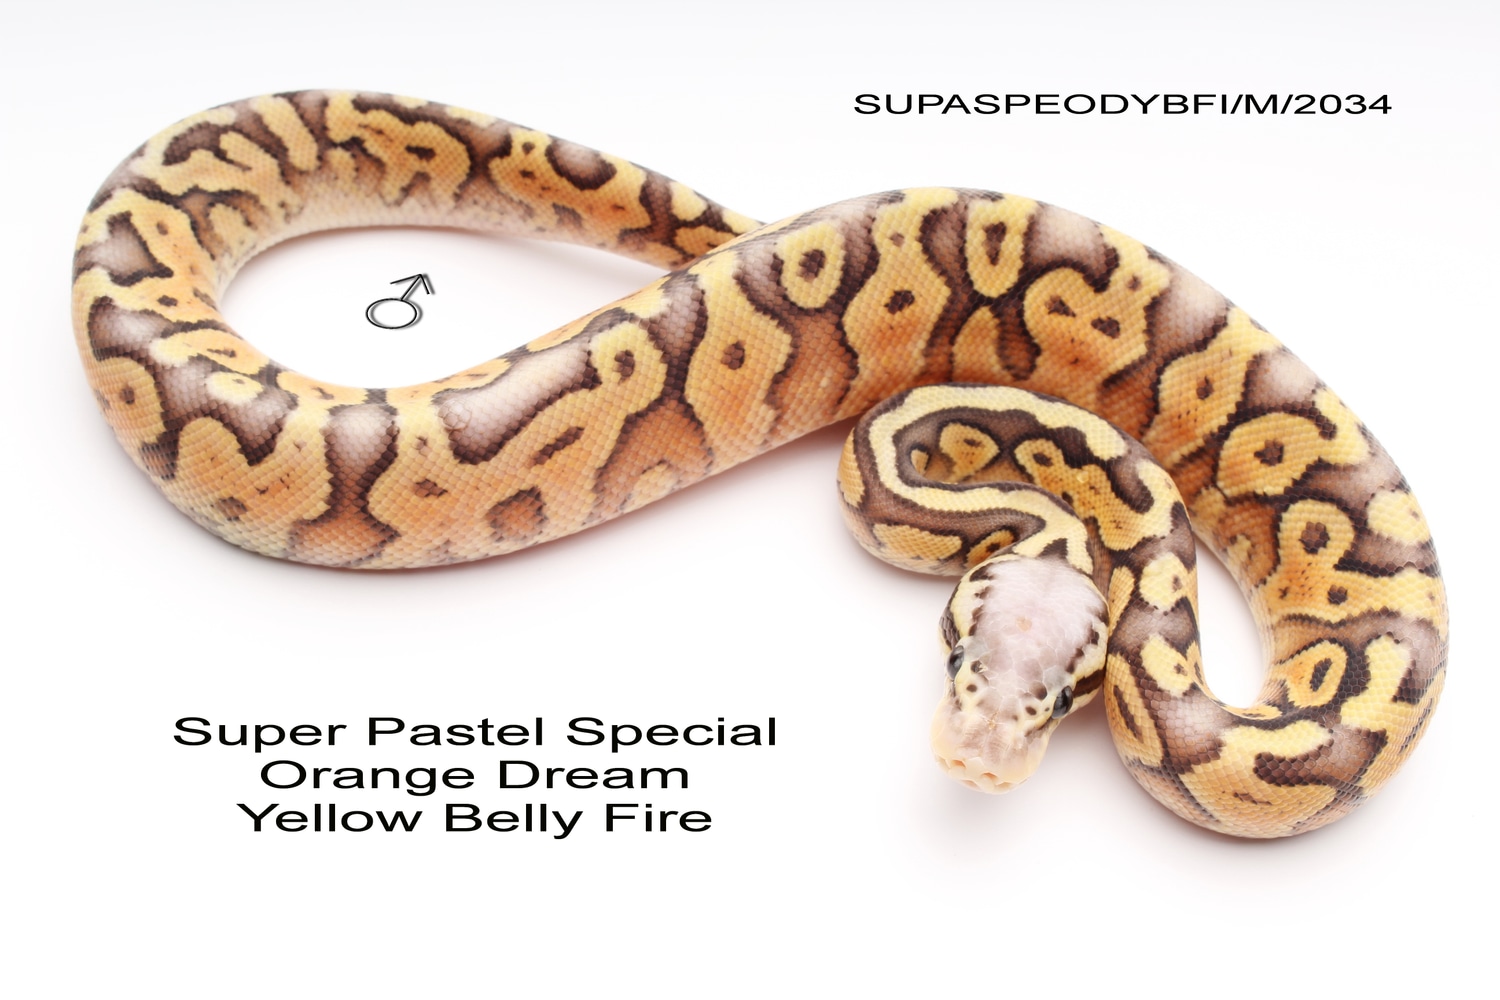 Super Pastel Special Fire Orange Dream Yellow Belly Ball Python by Austrian Reptiles